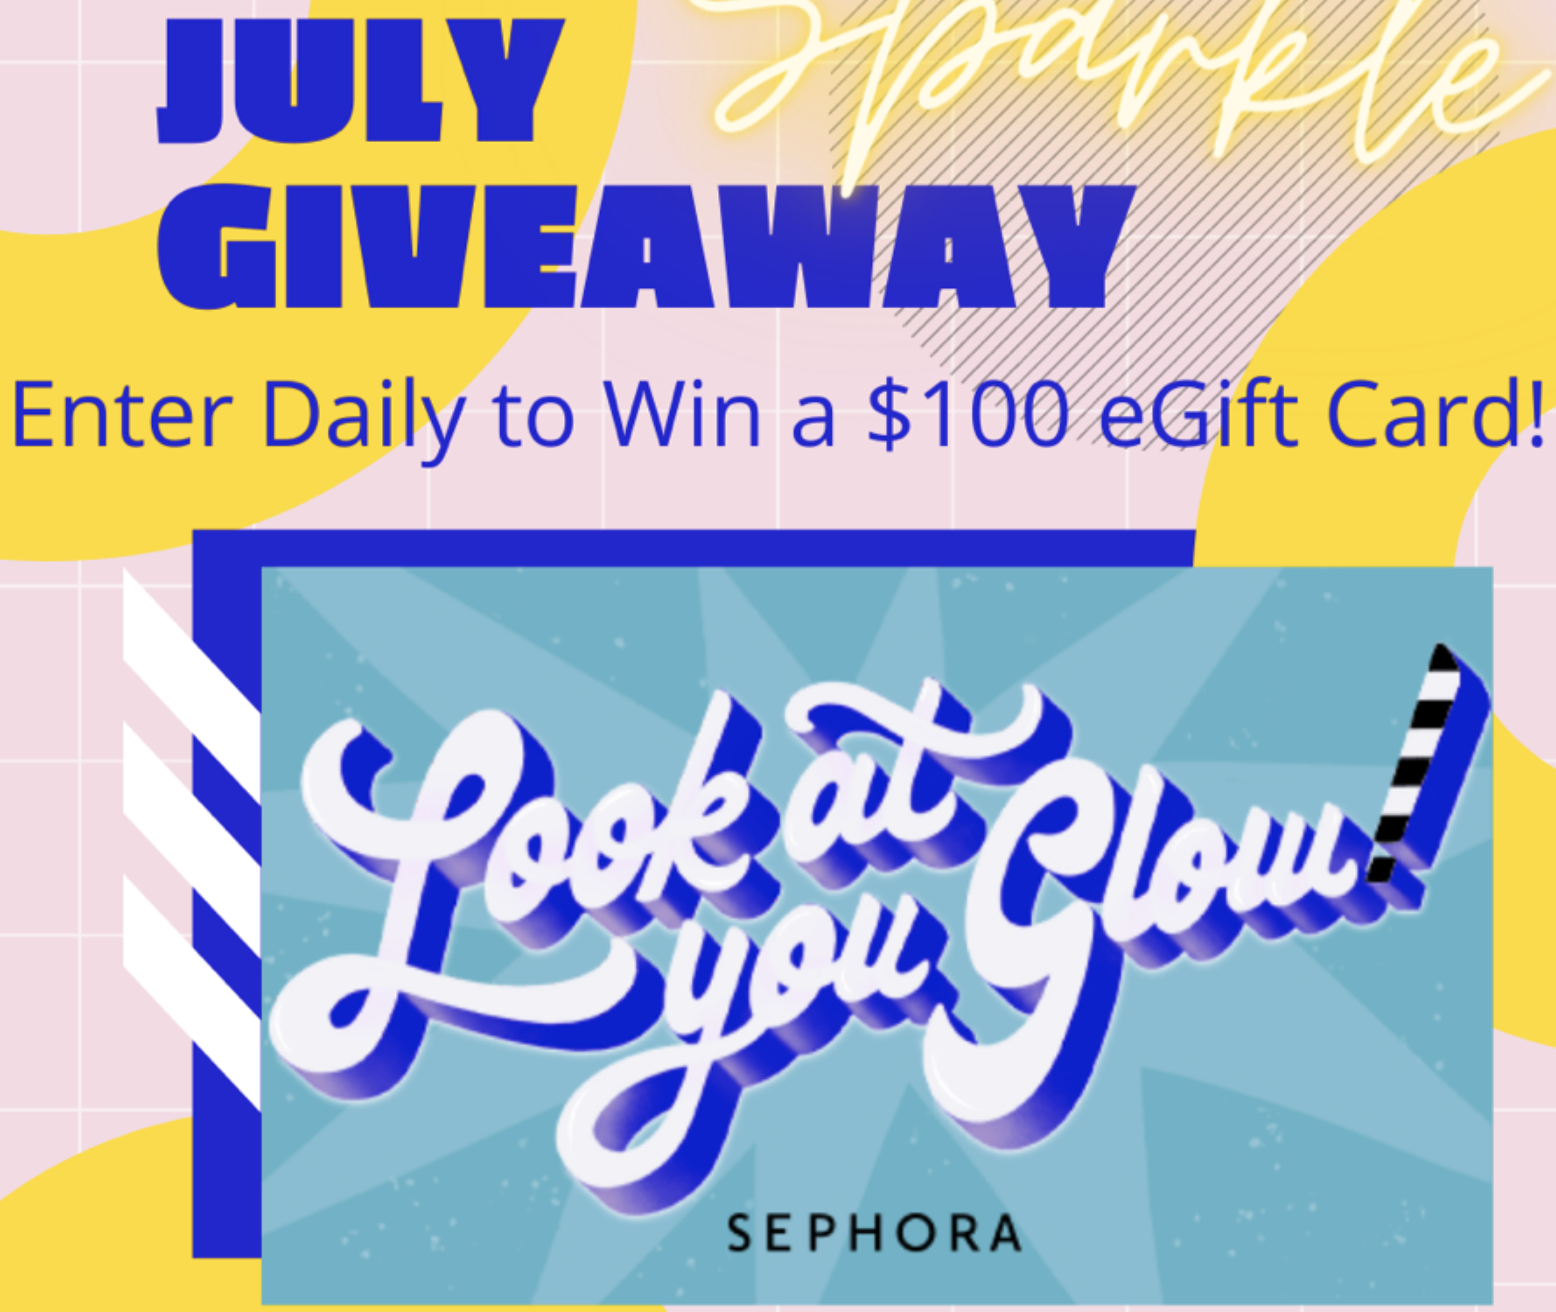 $100 sephora gift card giveaway, beauty giveaways, gift card giveaways, Sephora giveaway, Sephora gift cards